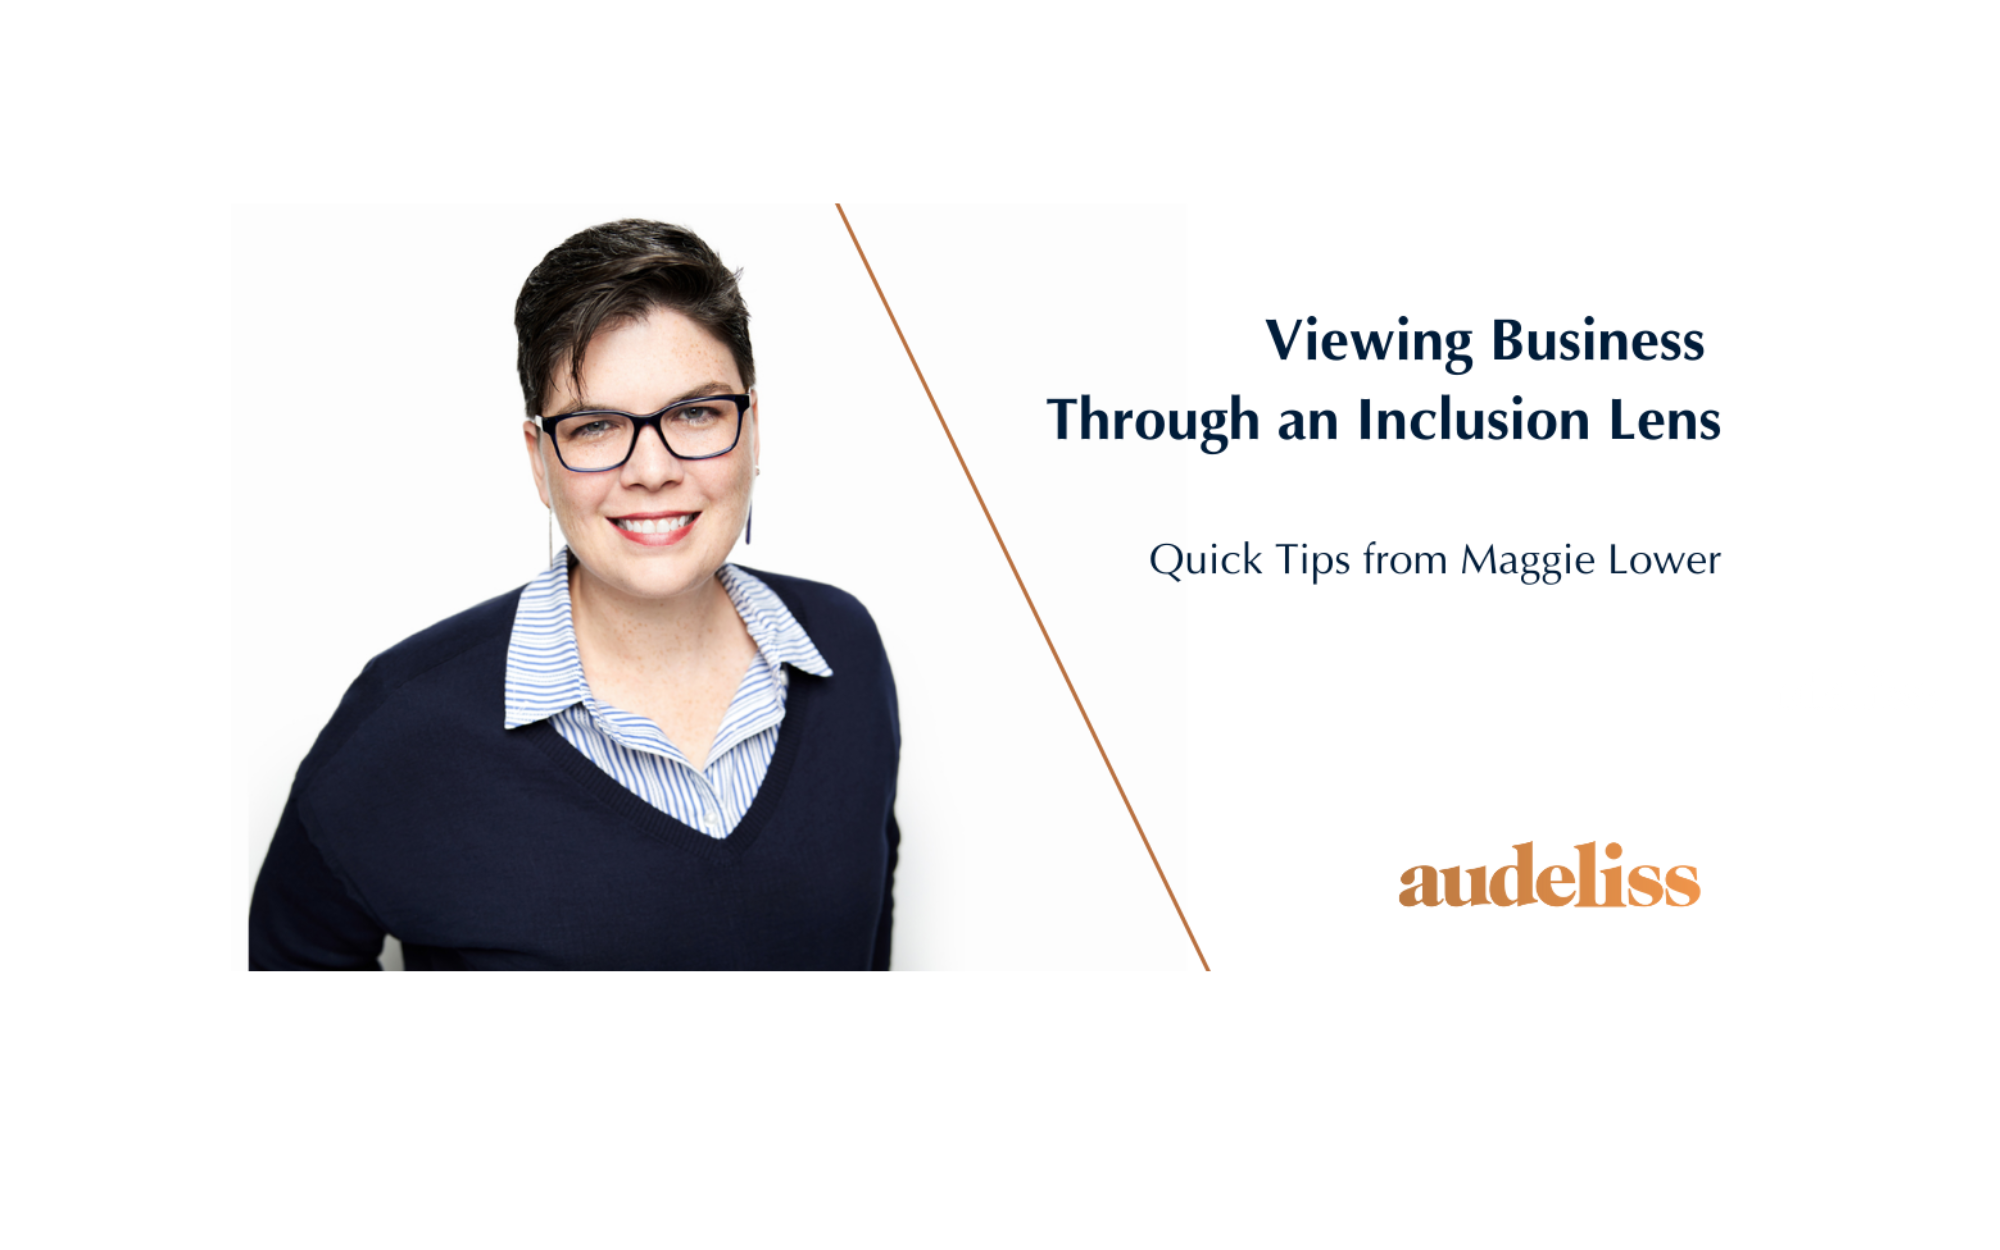 Viewing Business through an Inclusion Lens: Quick Tips from Maggie Lower